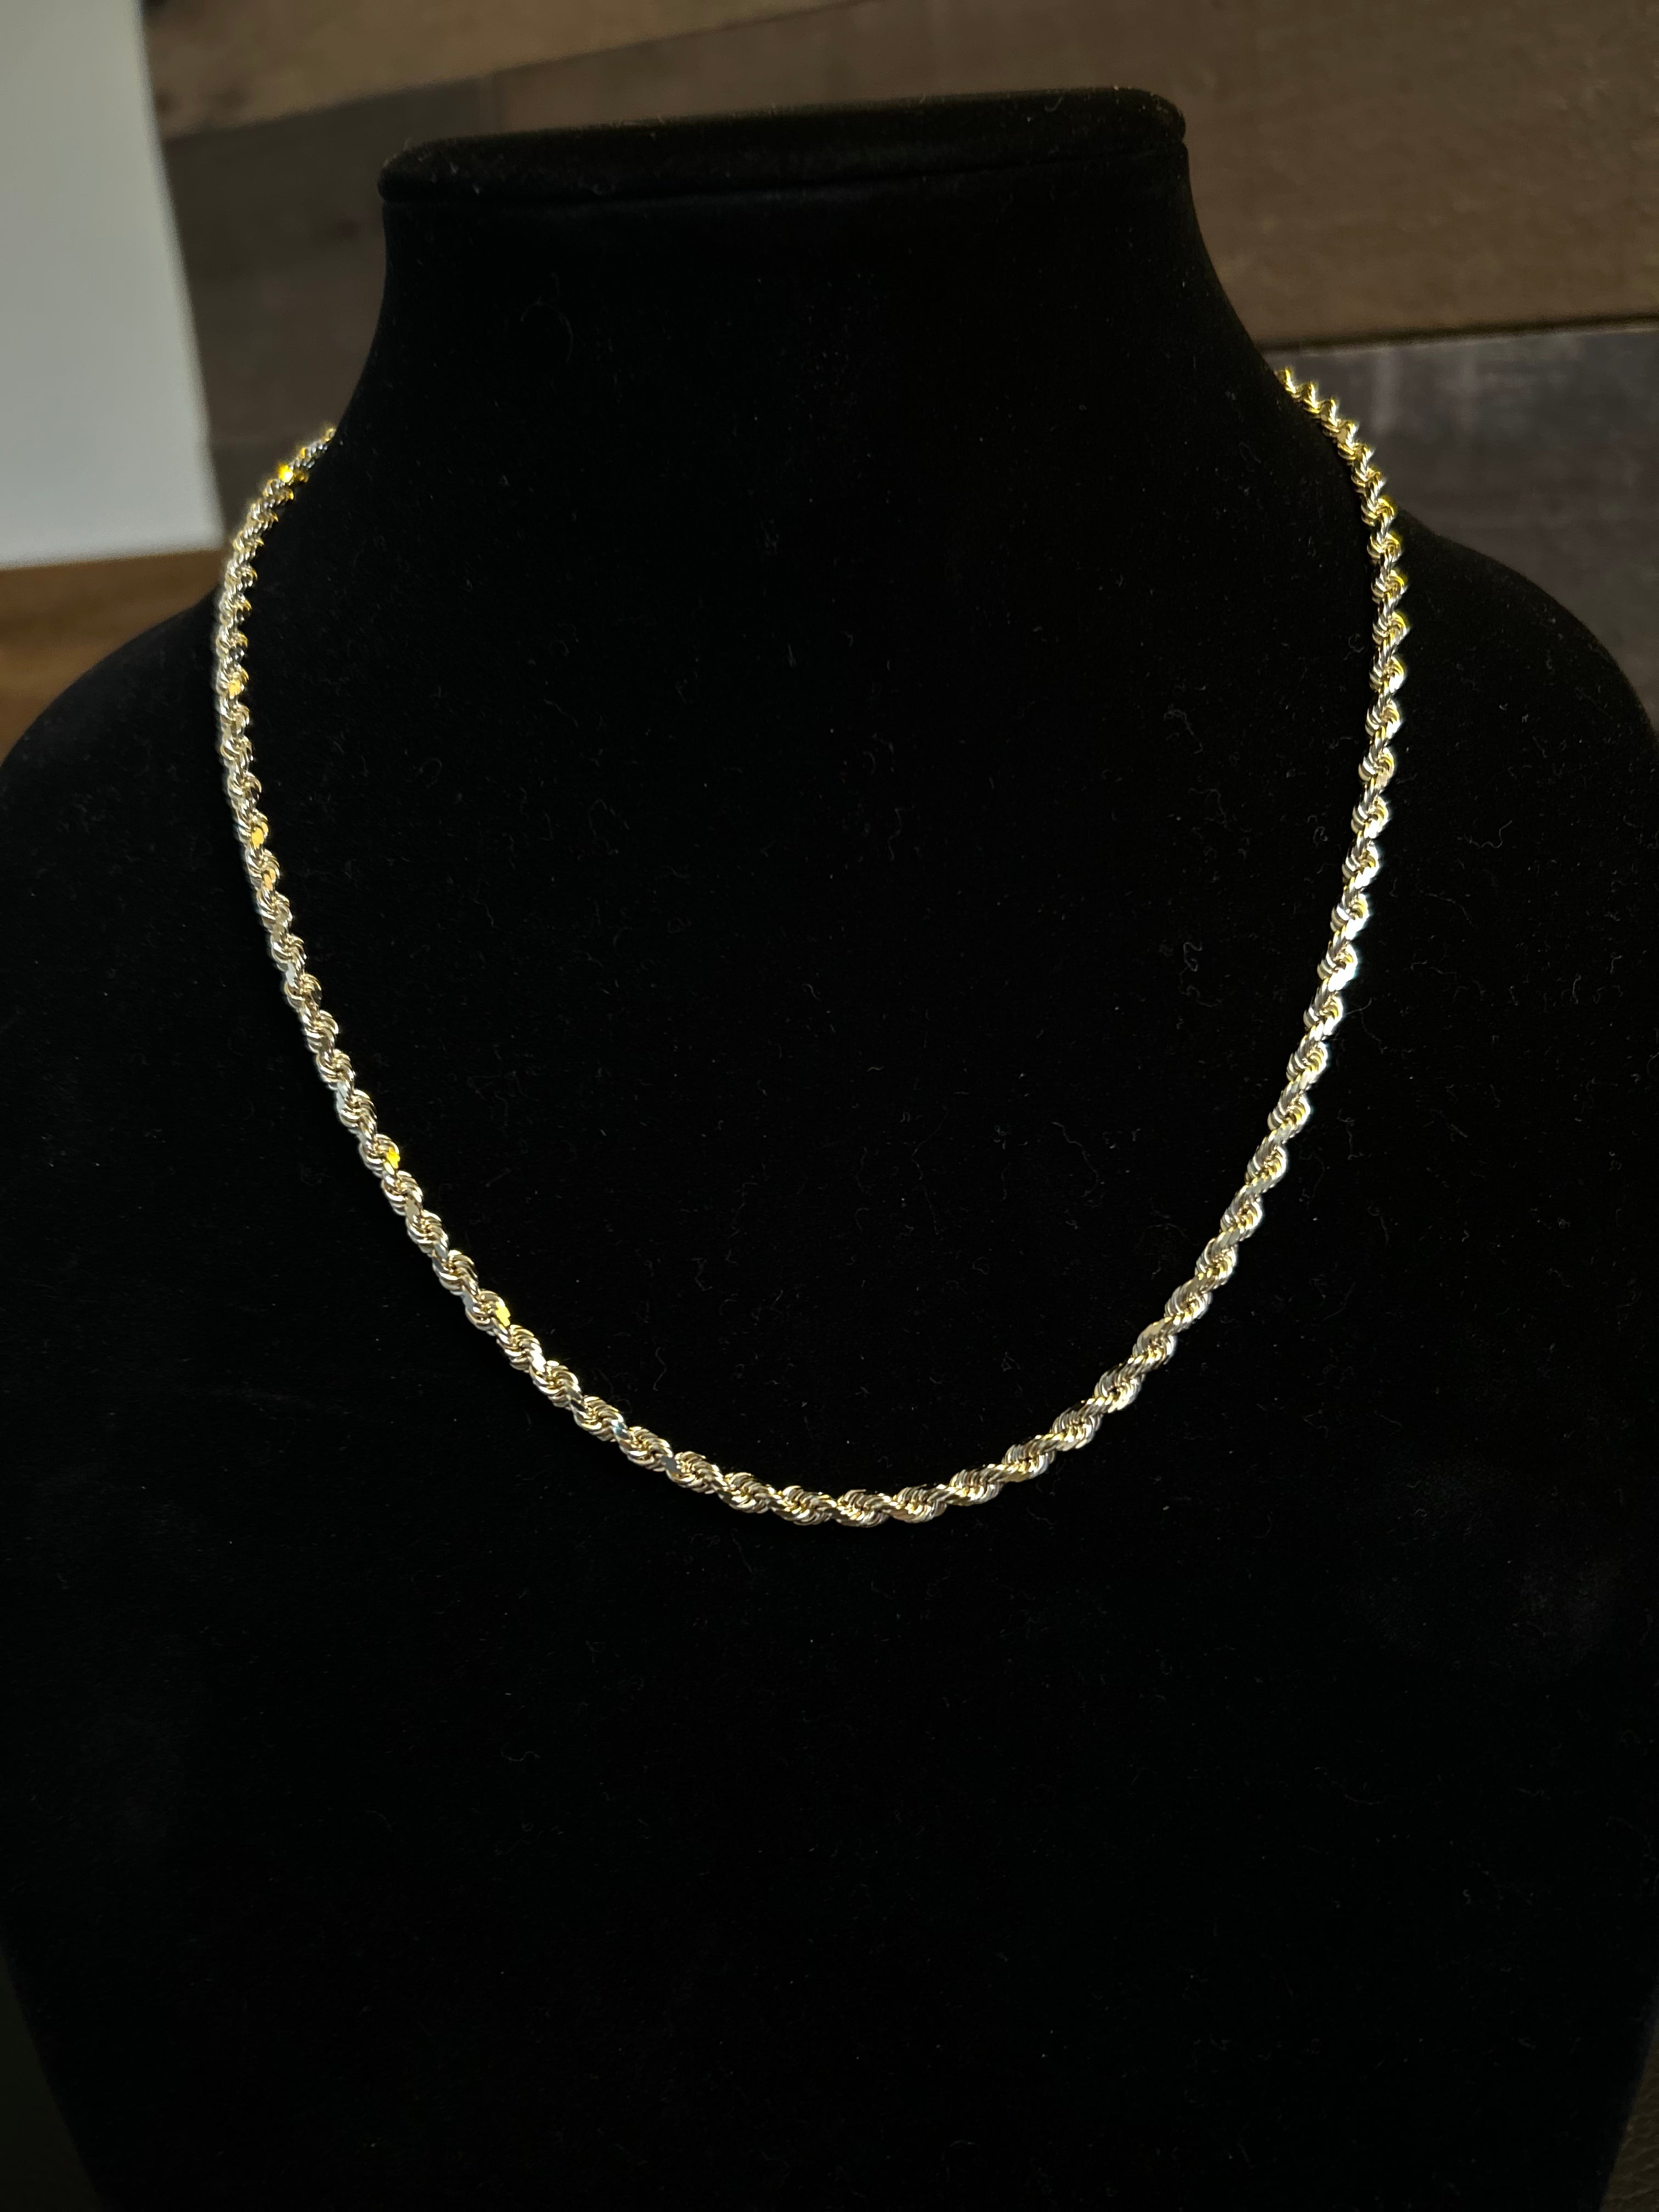 10k solid gold 18” d/c rope necklace 21.2grams